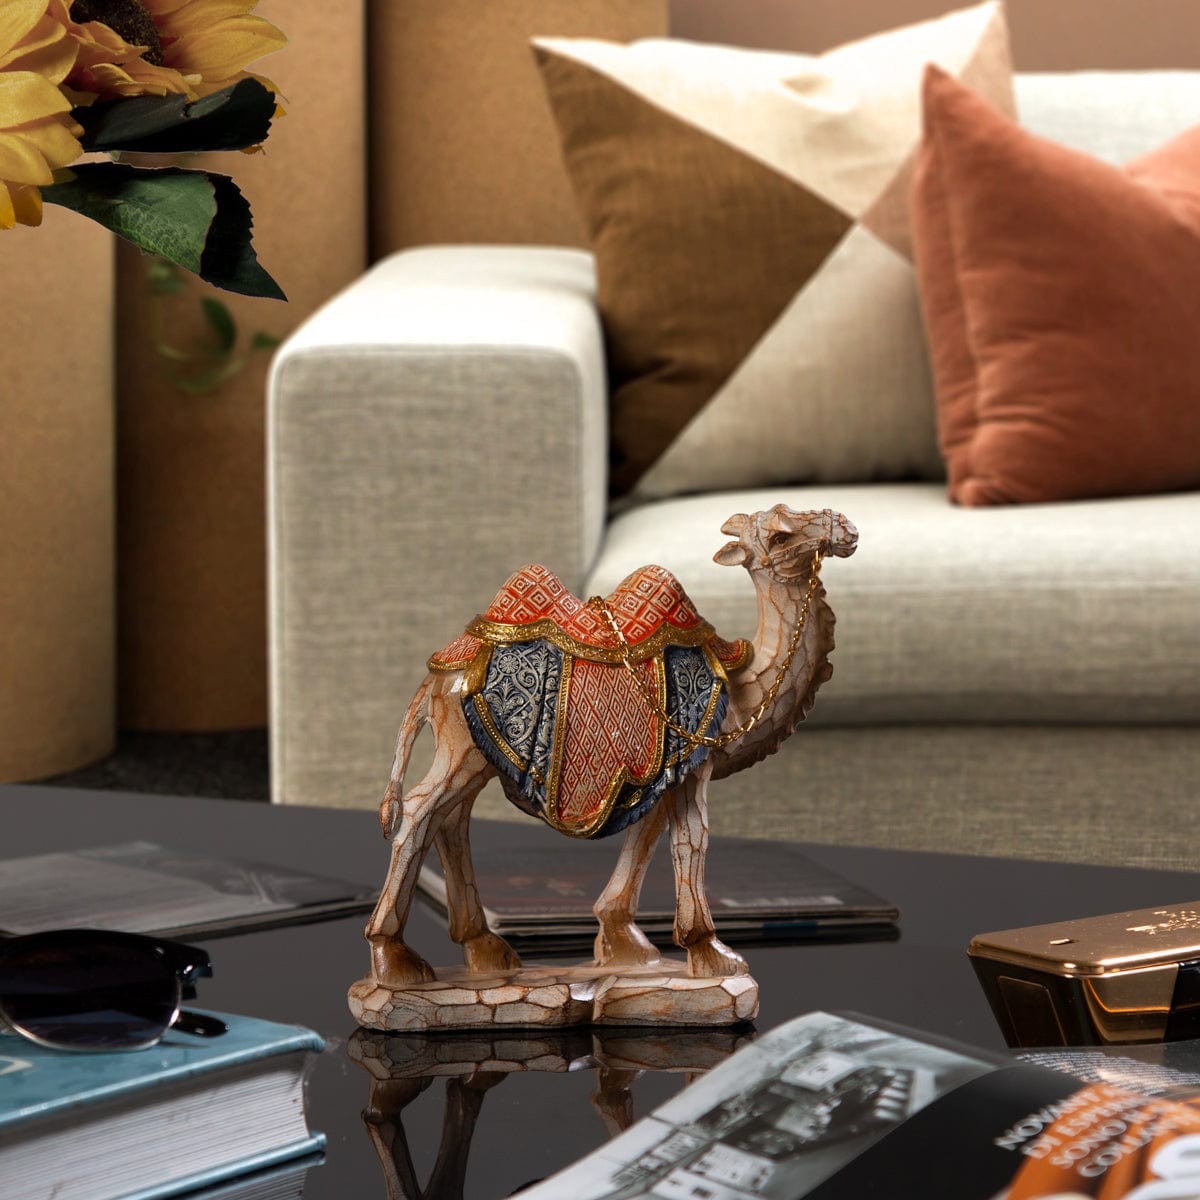 Red Butler Showpieces Dormedary Camel Small AADC00R06Y19A2 ADC06A2 Camel Showpiece – Elegance Inspired by Middle Eastern Artistry | Animal figurine showpieces Redbutler